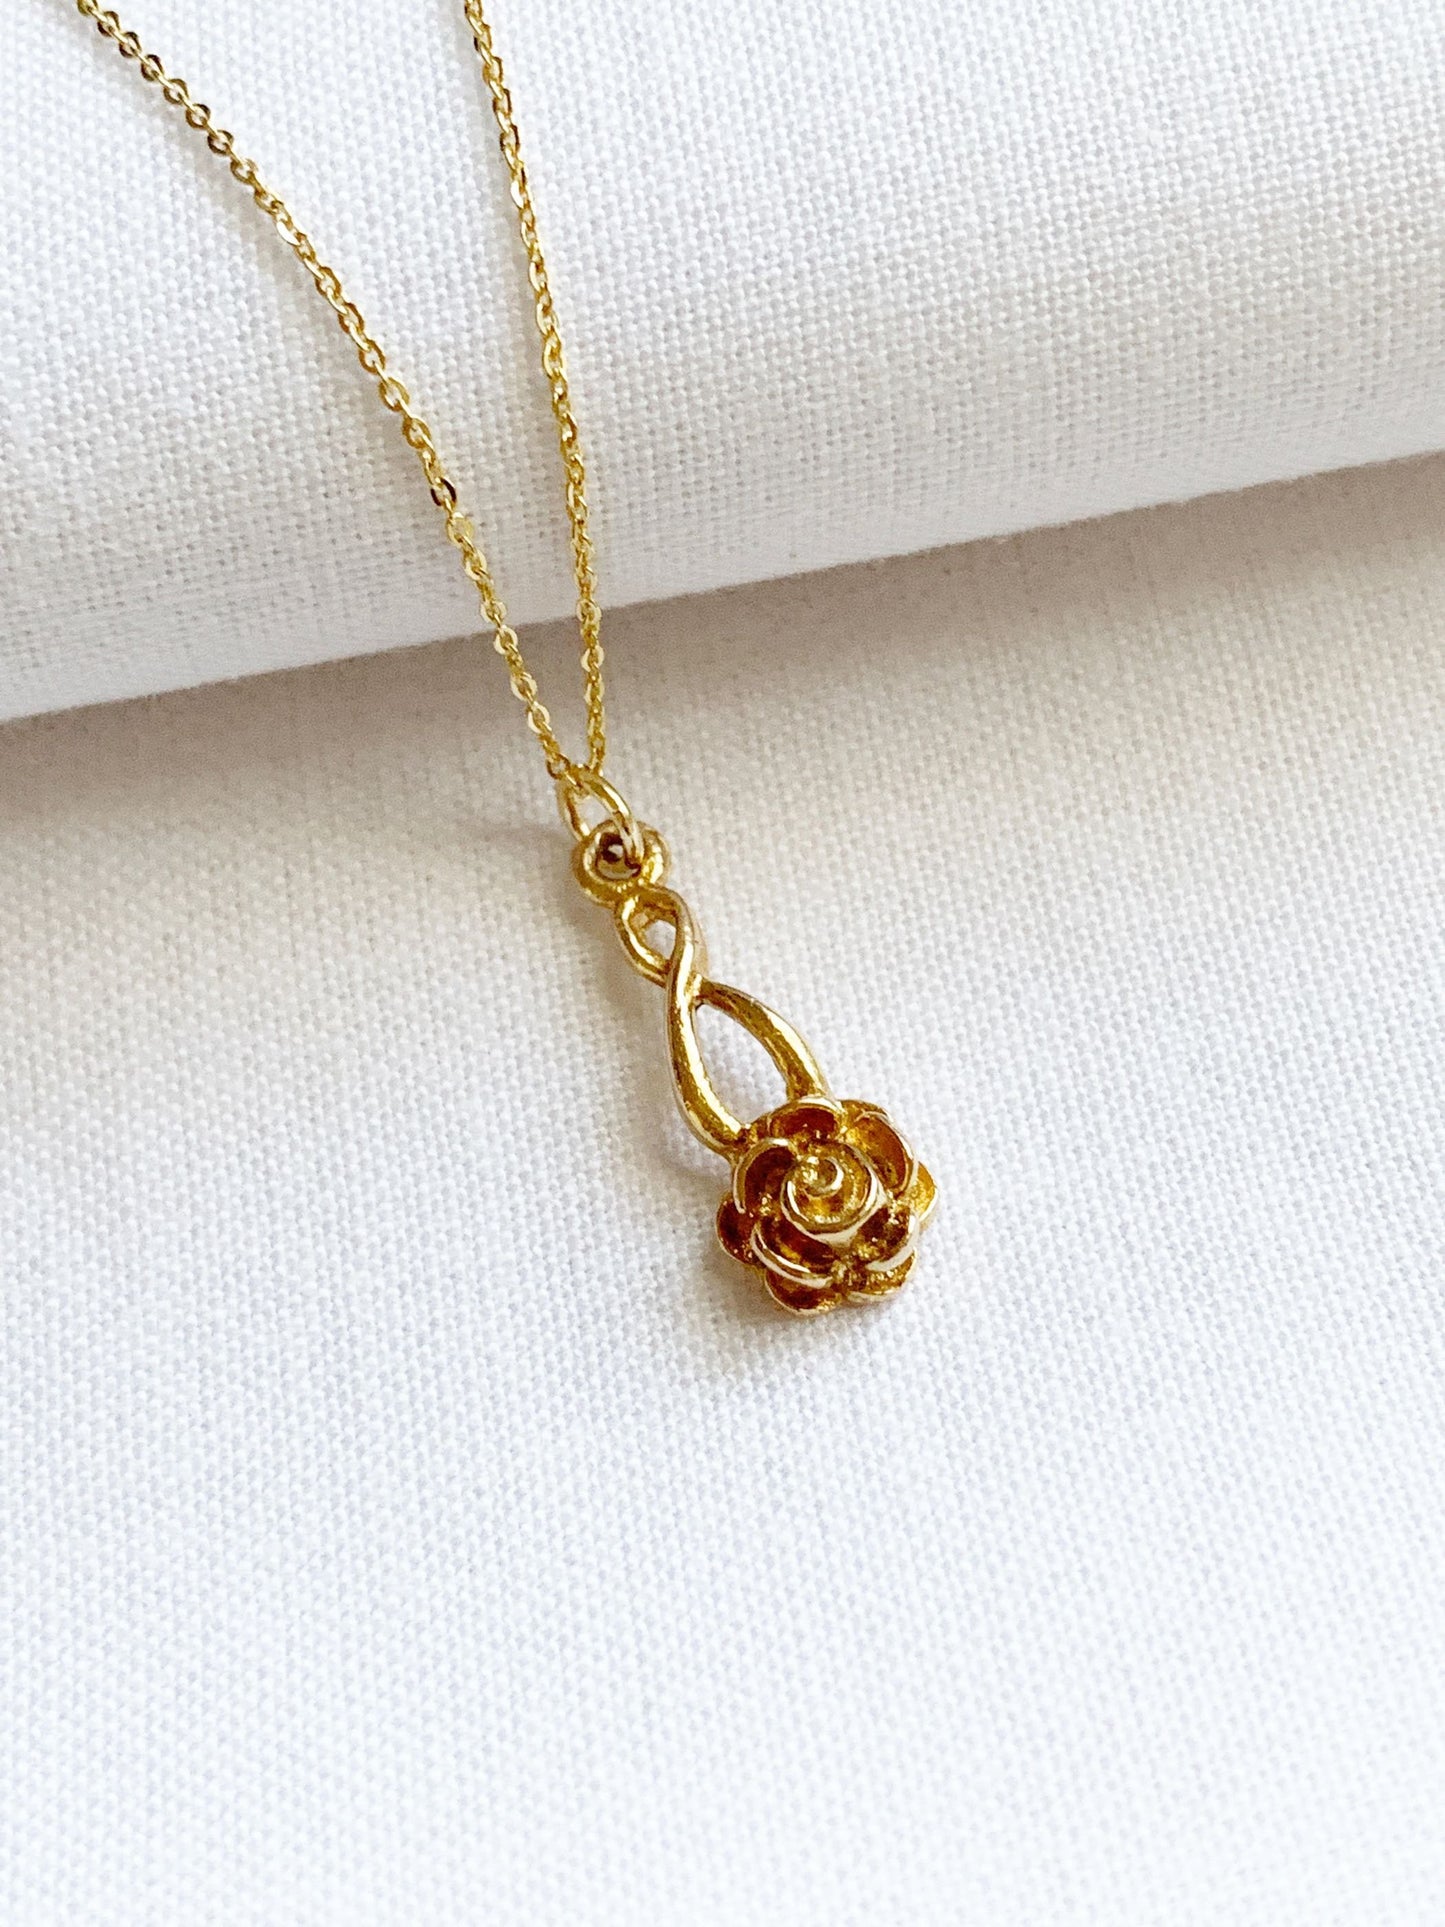 Vintage 9ct Gold Infinity Rose Pendant Necklace